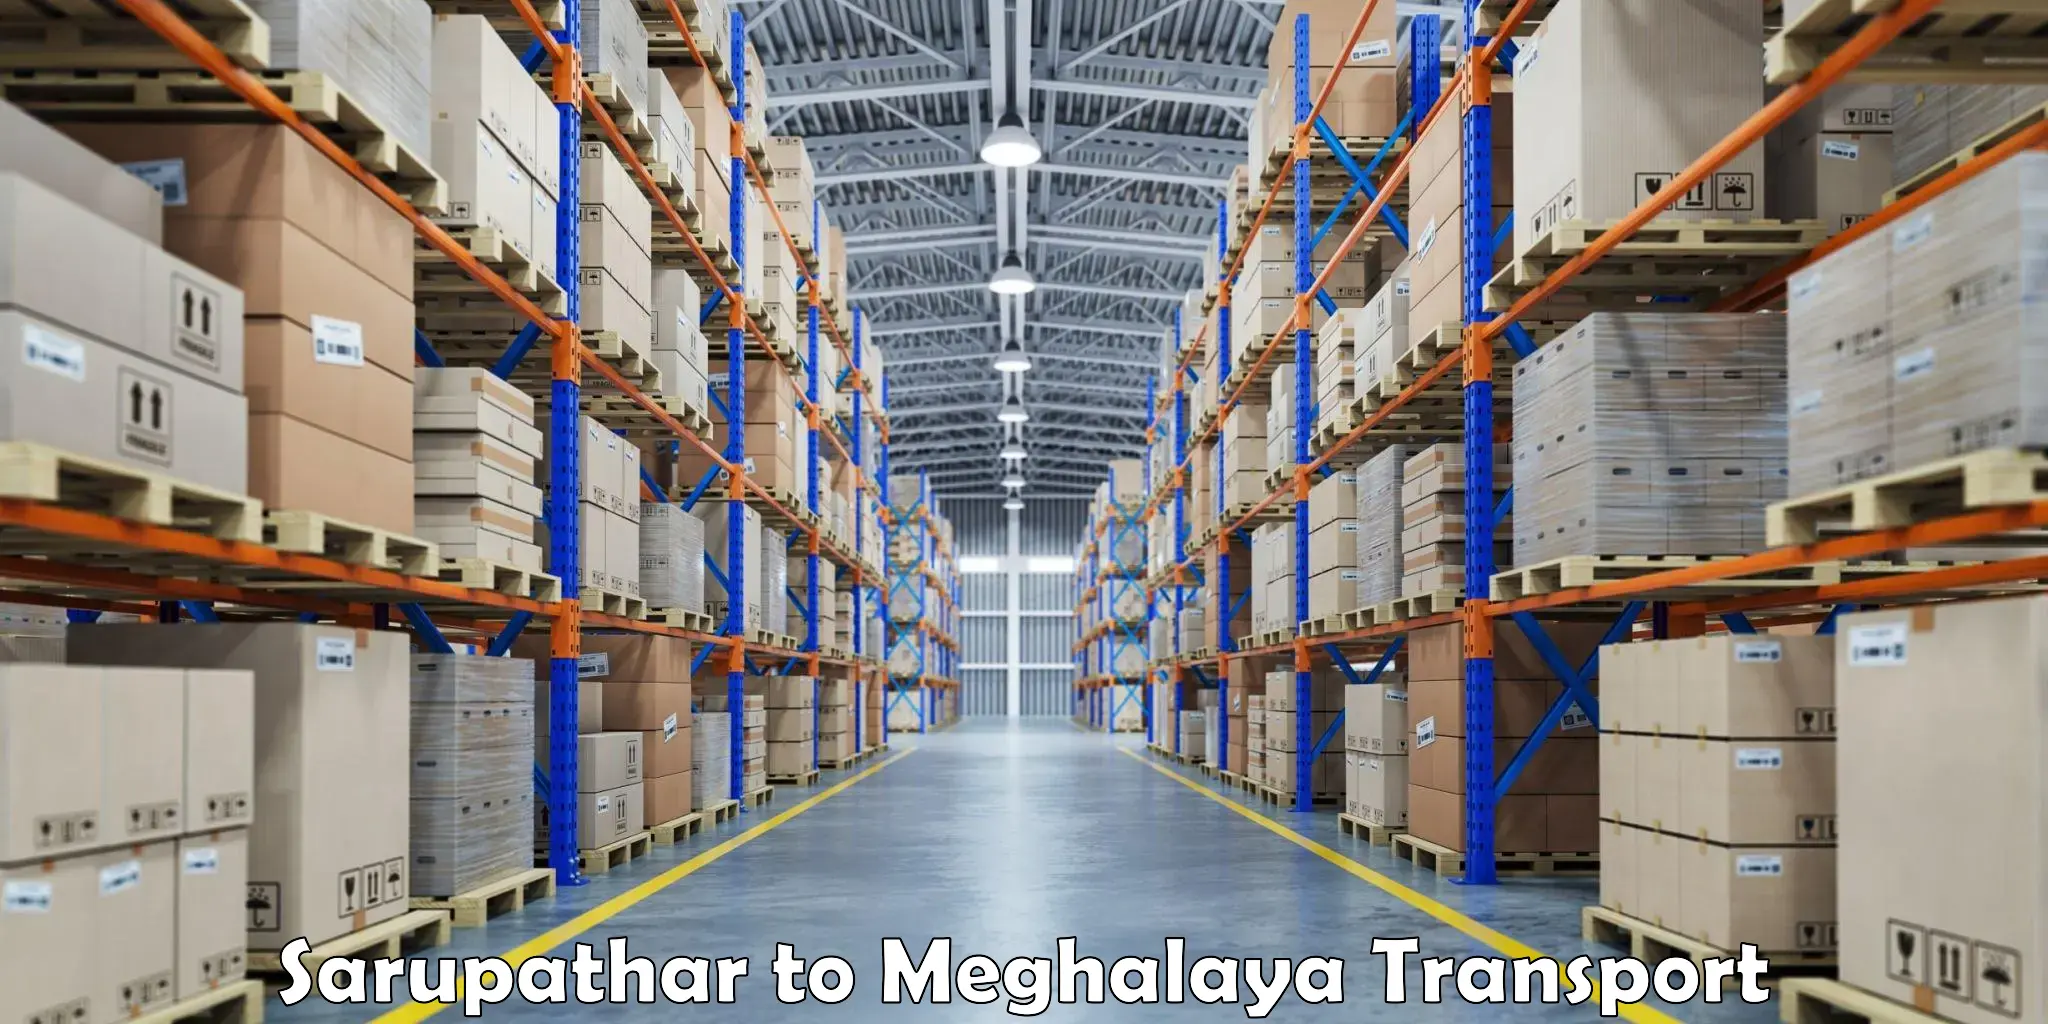 Truck transport companies in India Sarupathar to Shillong